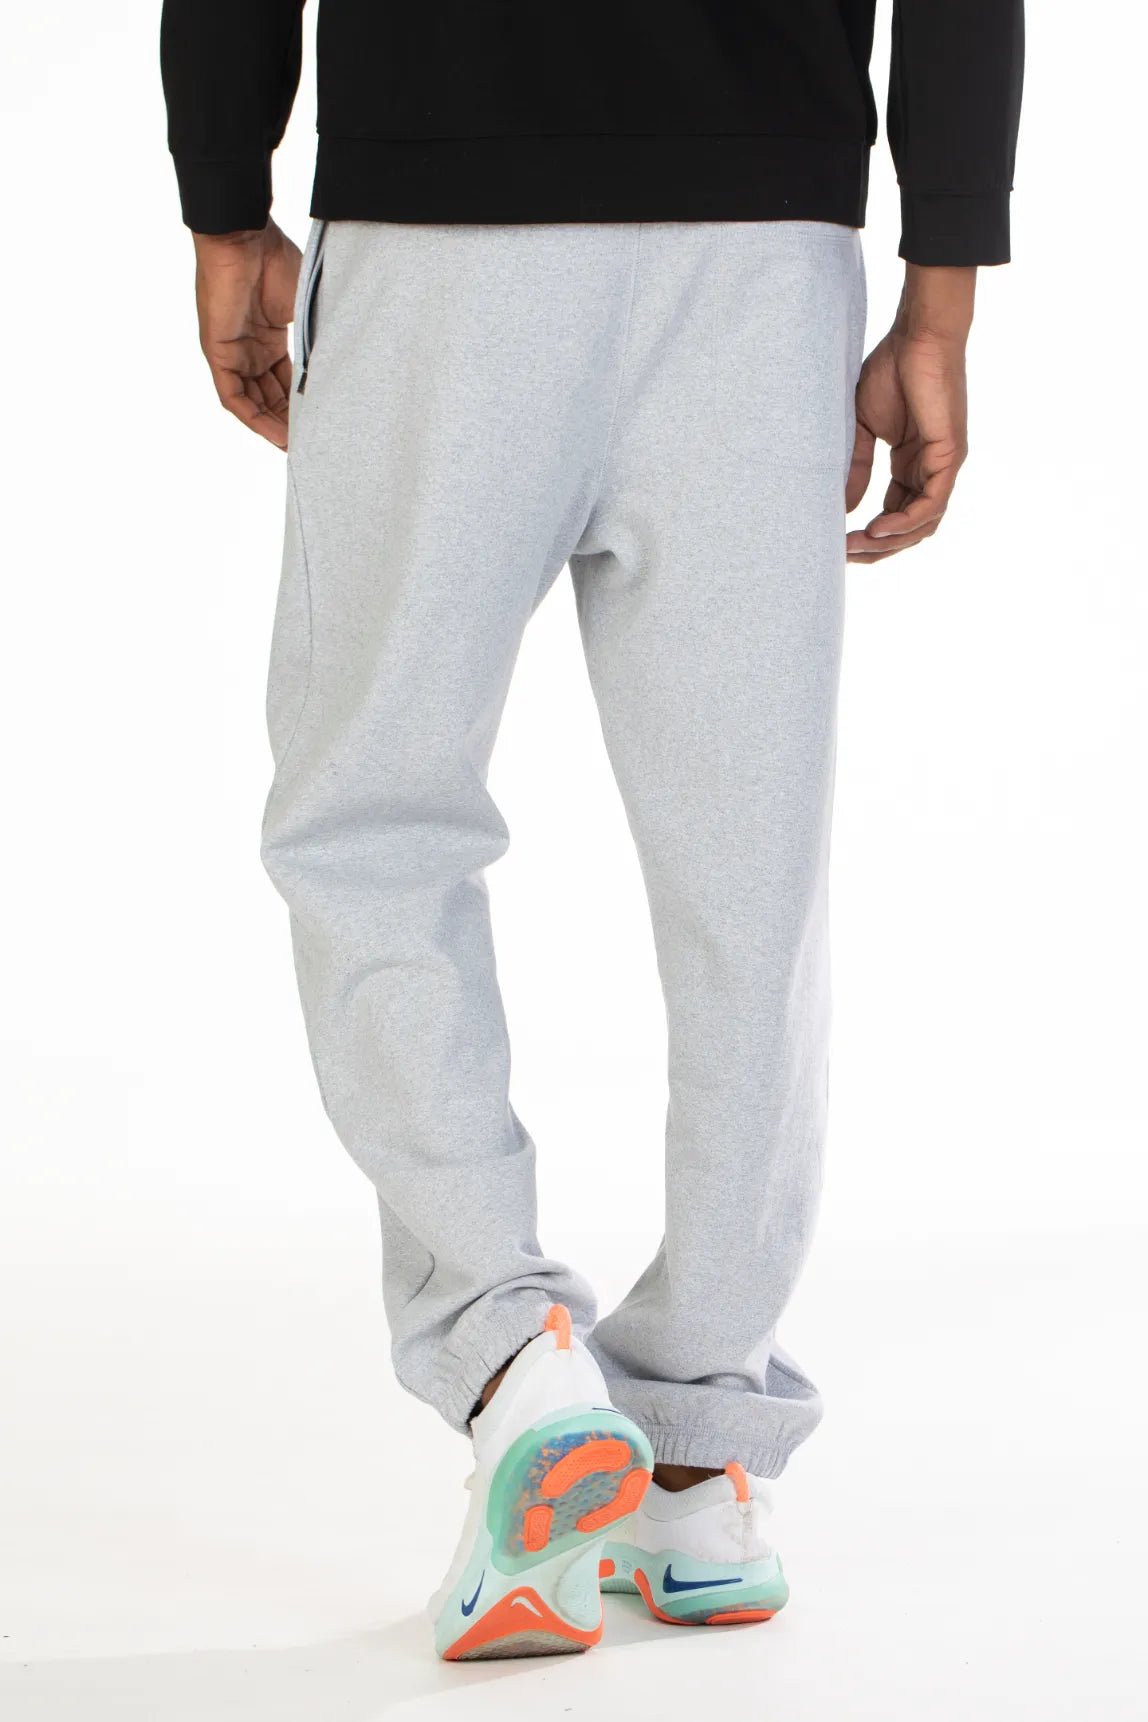 Buy Solid Knit Cotton Joggers Online